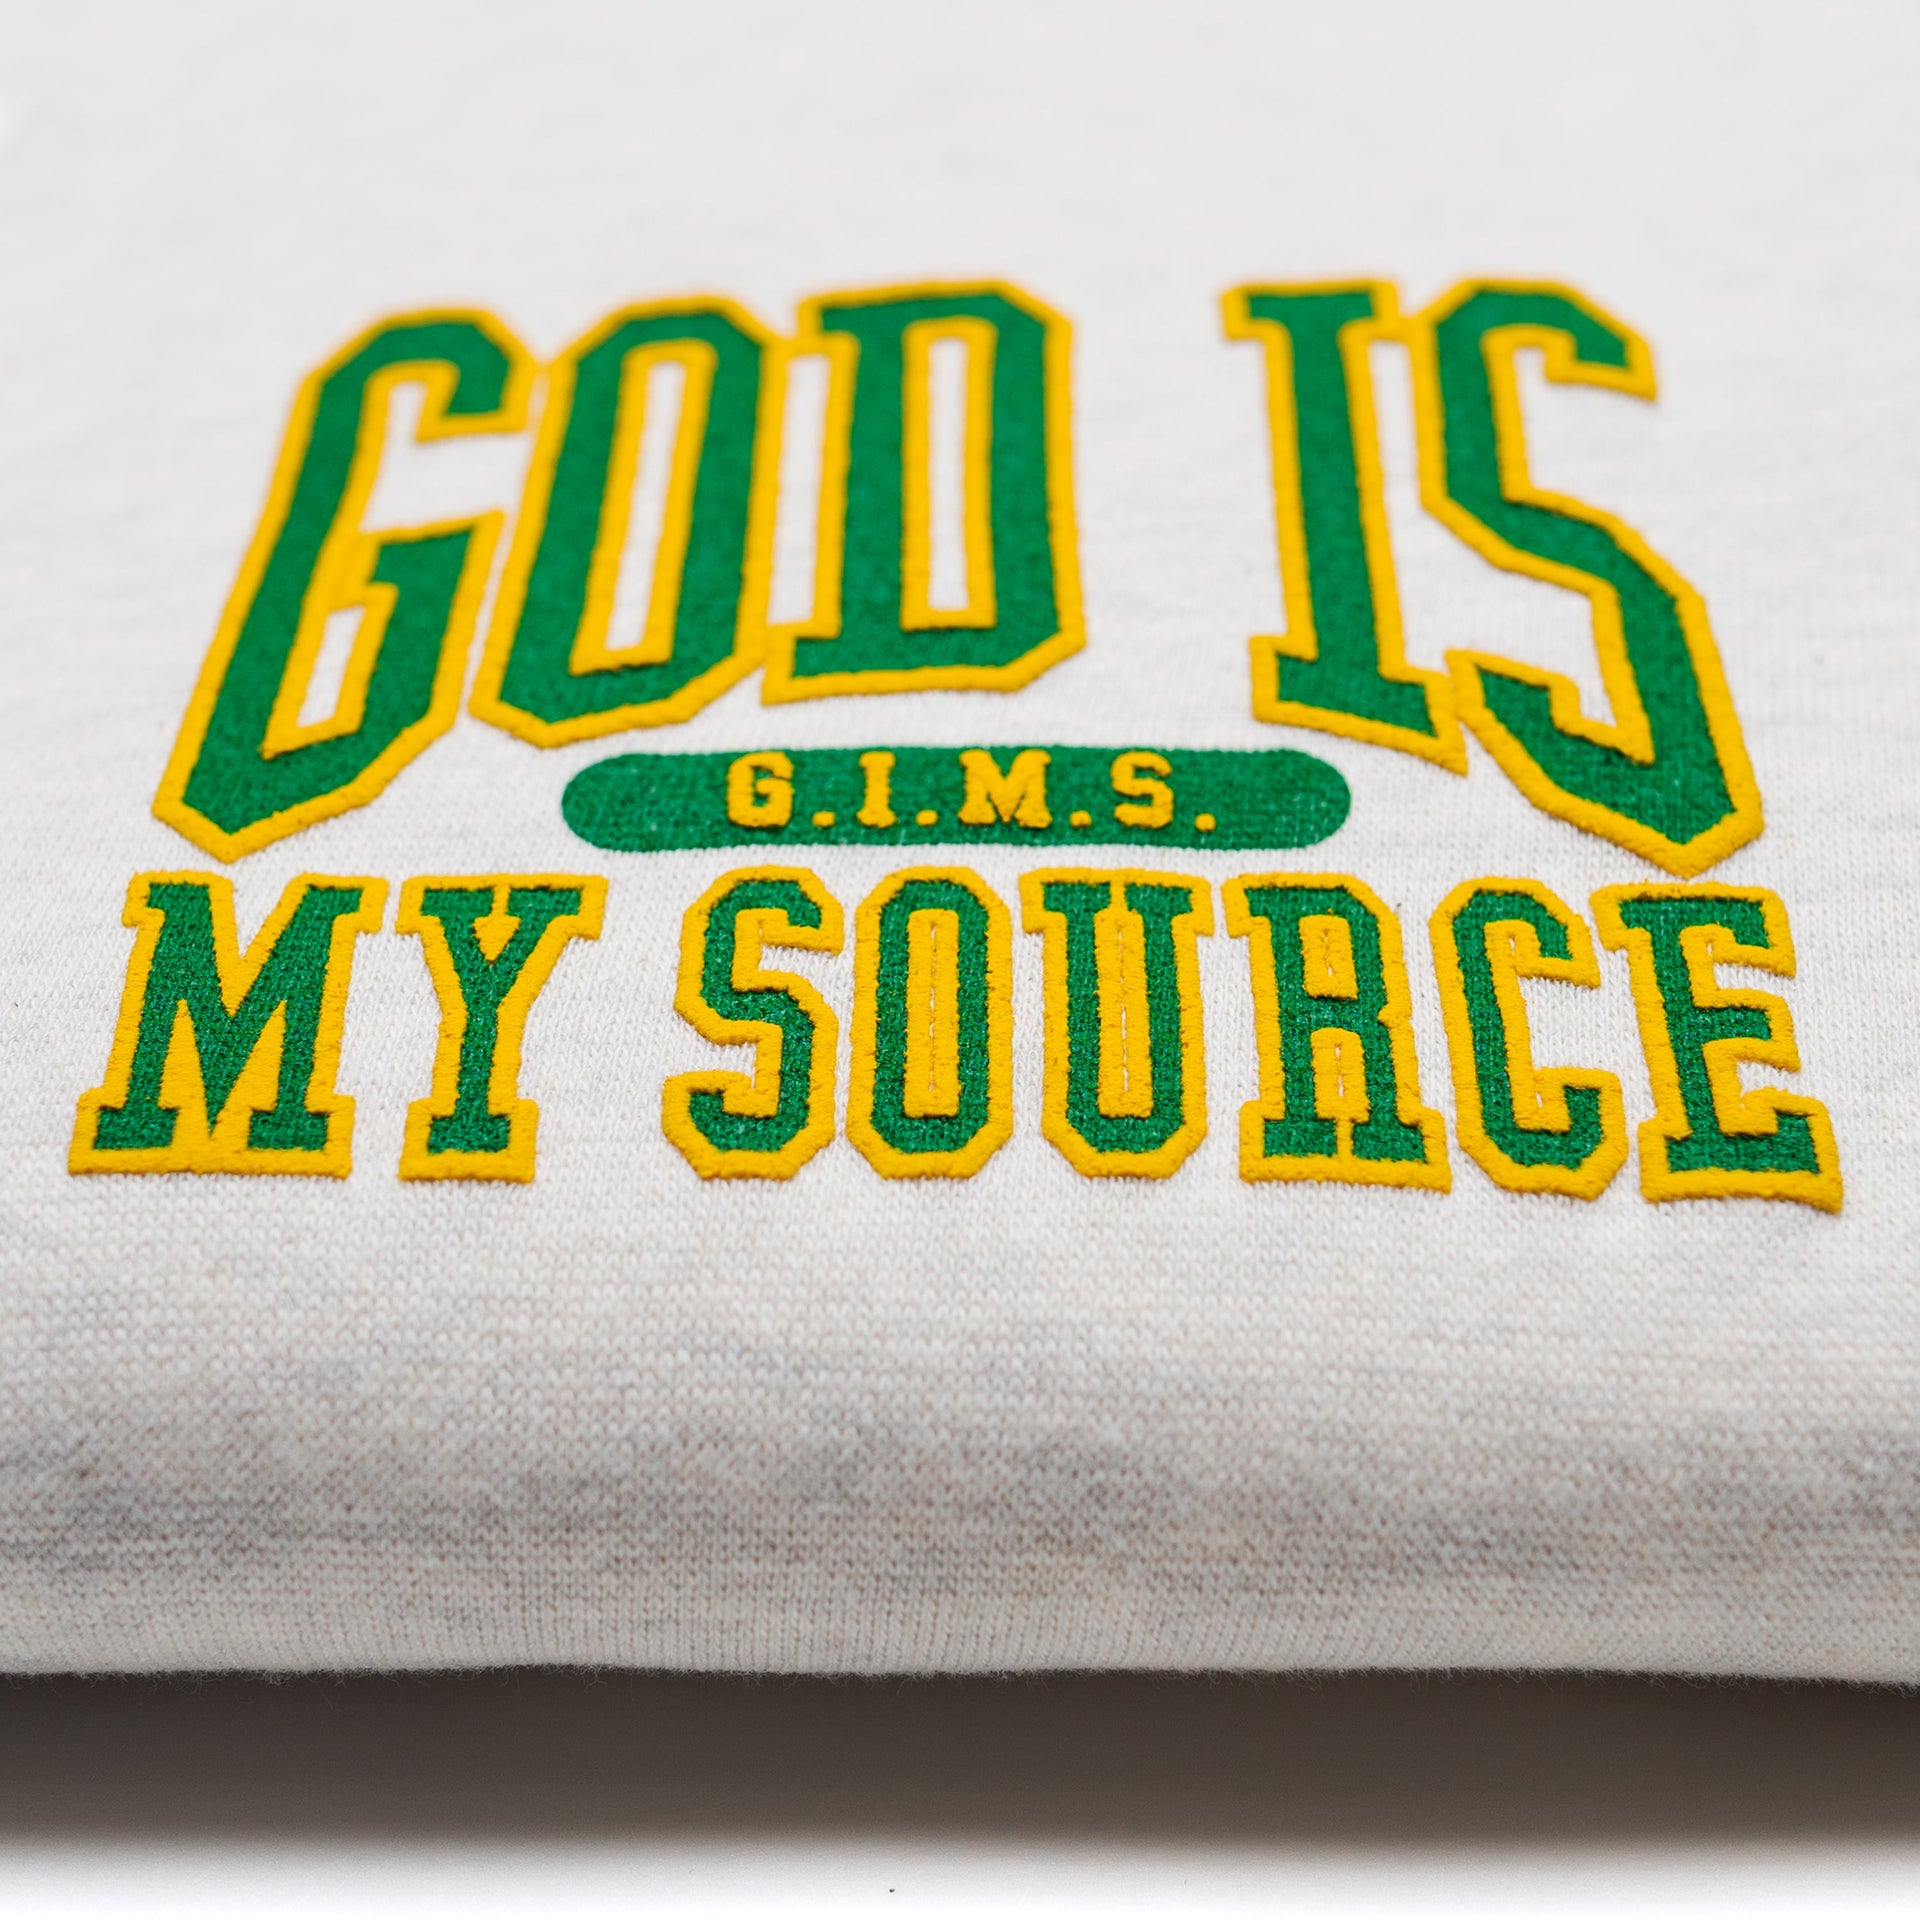 God Is My Source 'Campus' Joggers Oatmeal / Green - God Is My Source